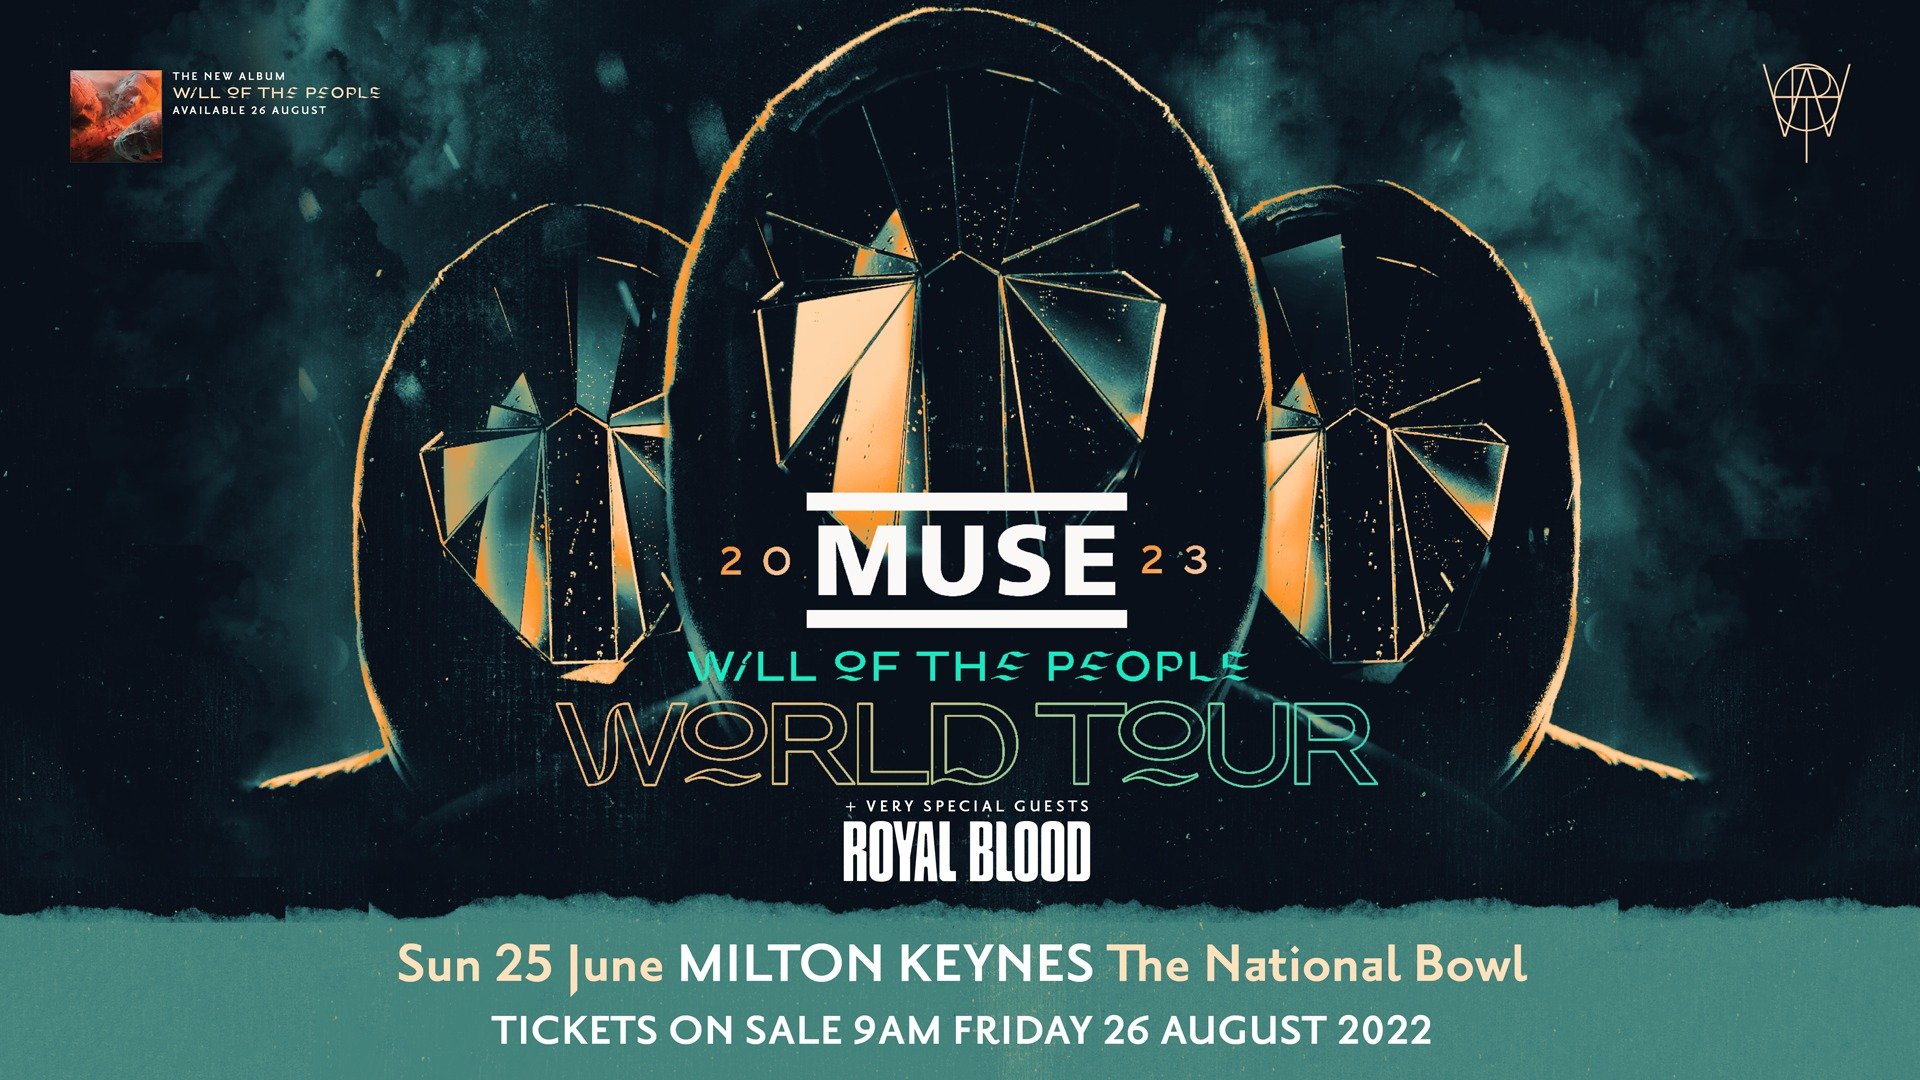 Muse announced to play the National Bowl in Milton Keynes